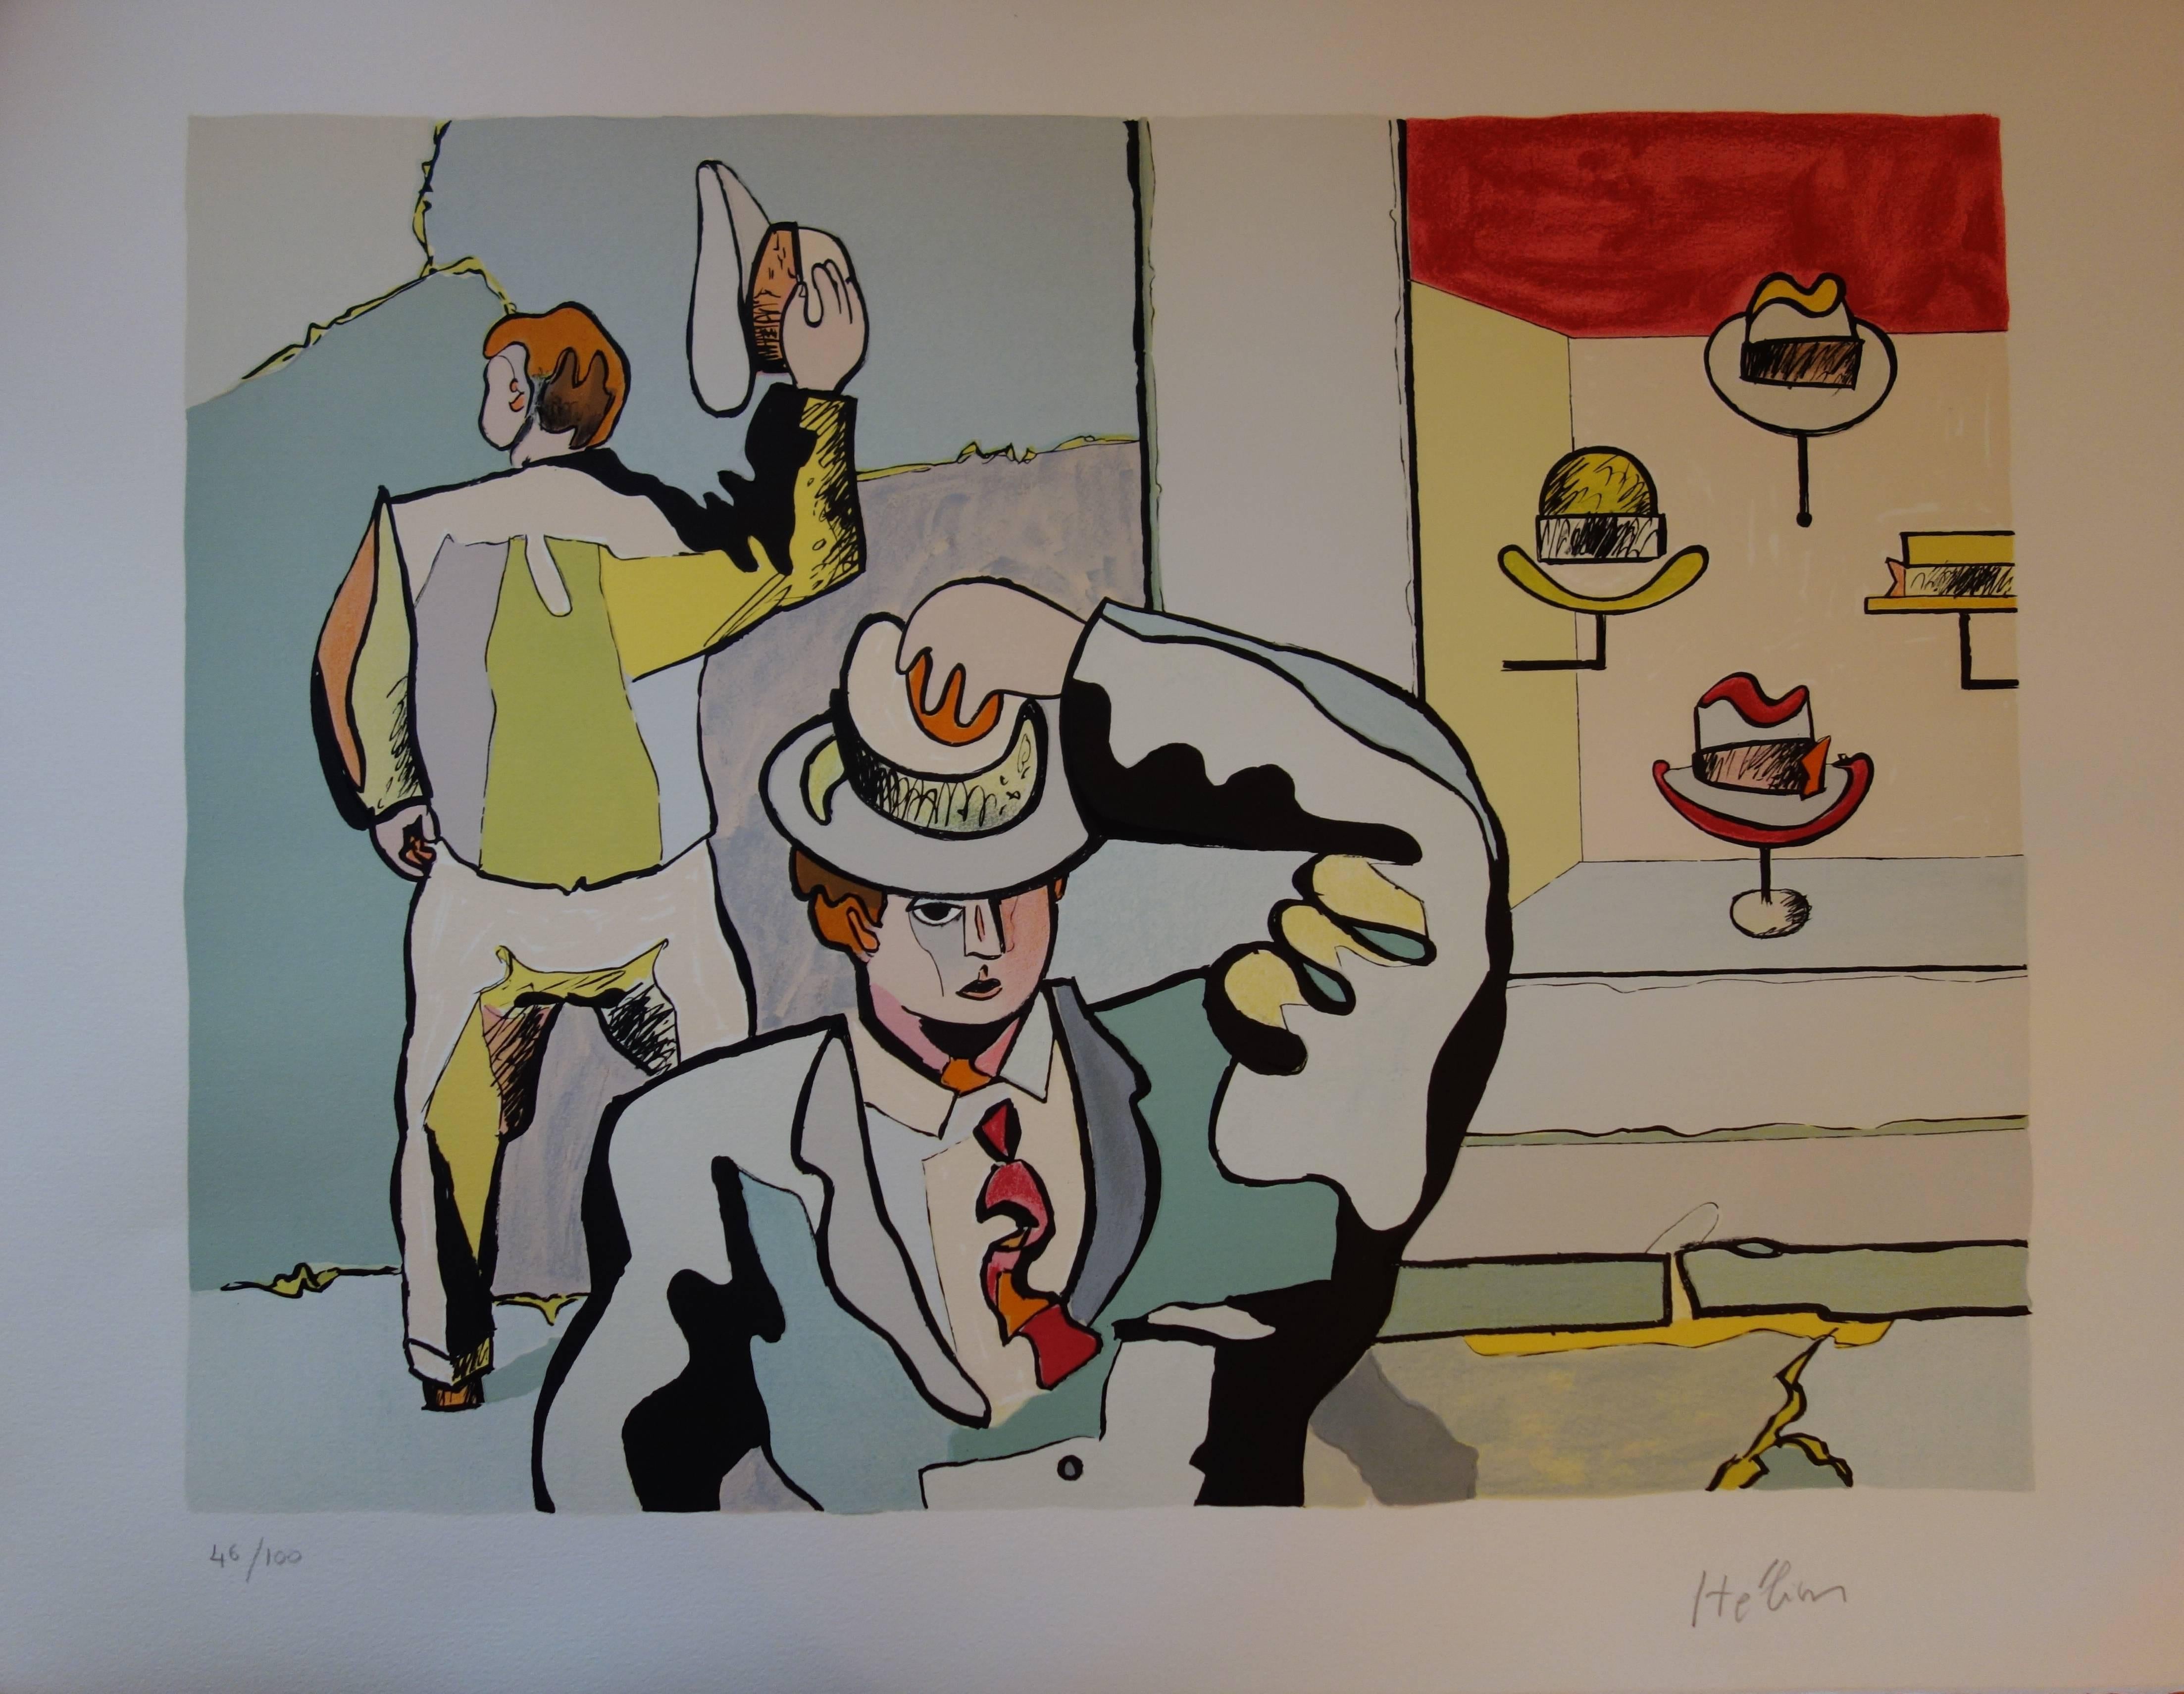 Jean Helion Figurative Print - In the Hats Shop - Original handsigned lithograph - 100 copies